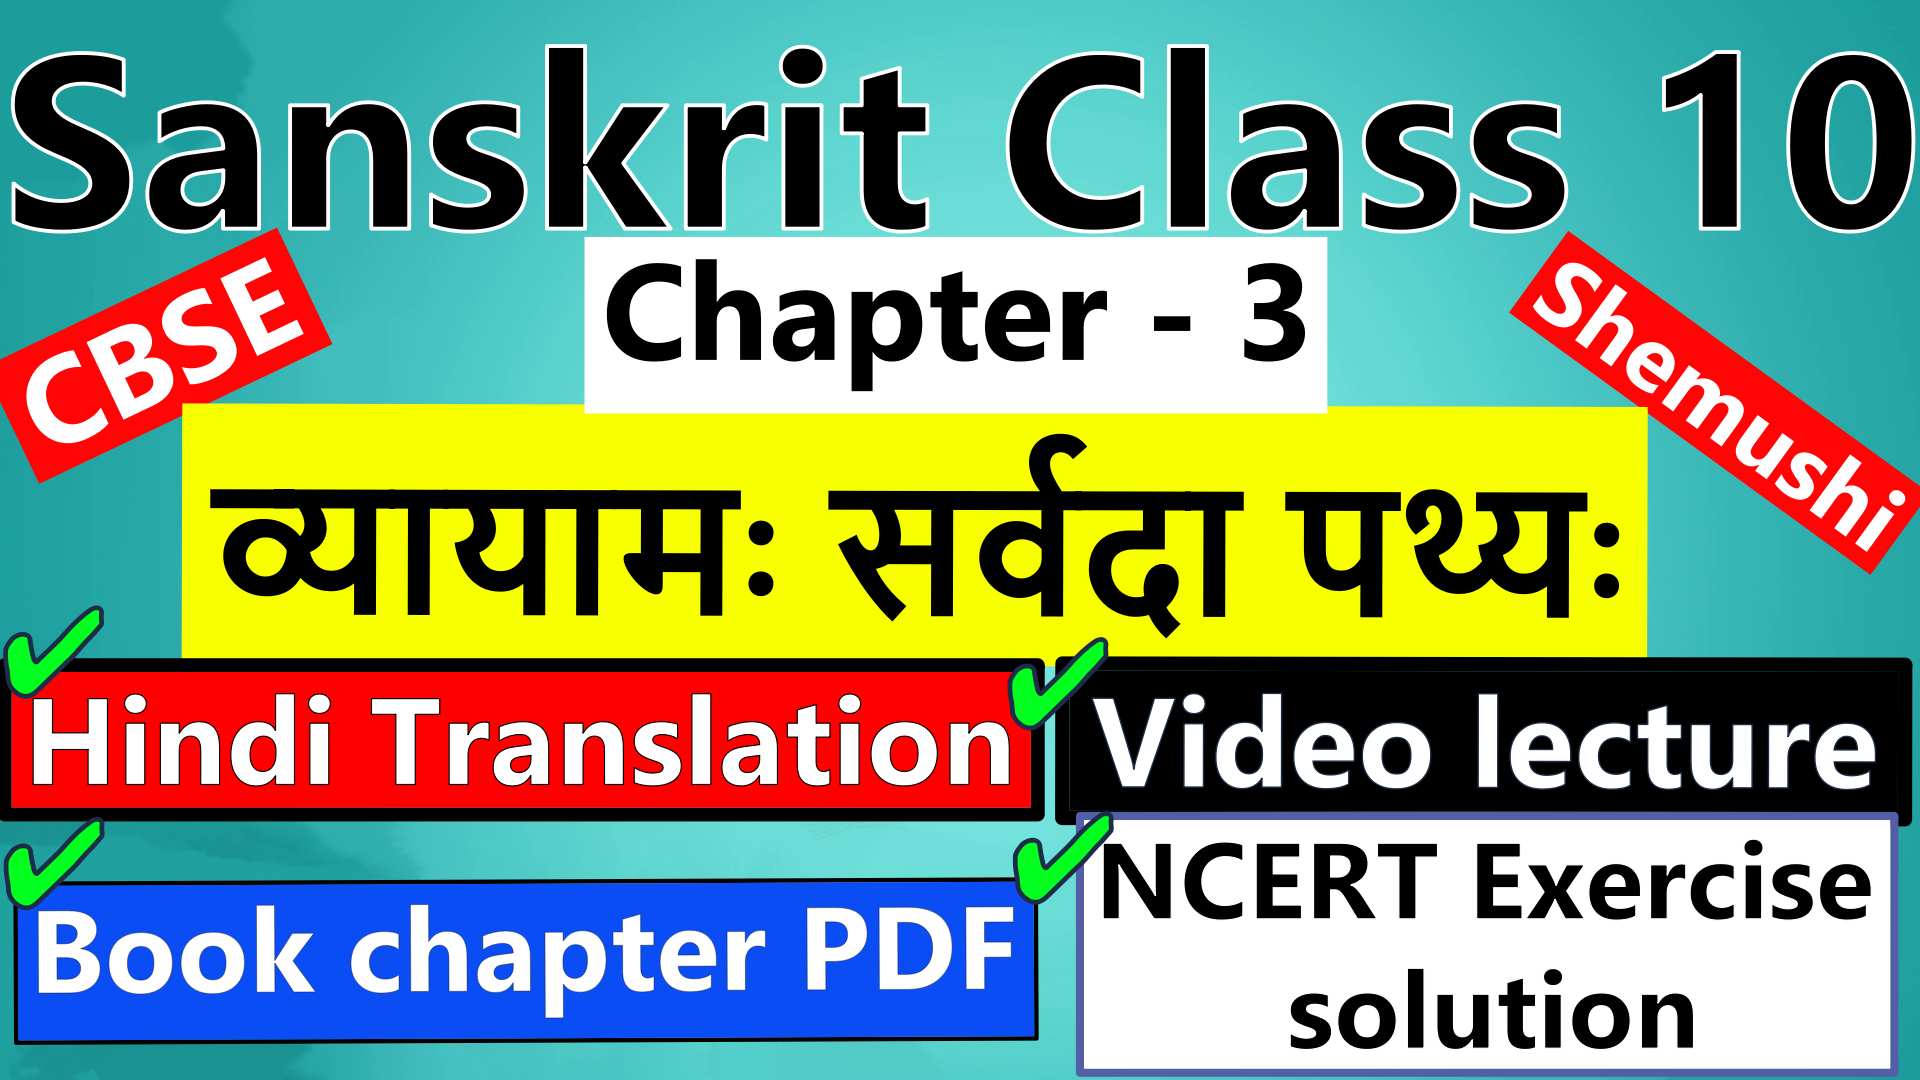 sanskrit-class-10-chapter-3-व्यायामः-सर्वदा-पथ्यः-Hindi-Translation-Video-lecture-NCERT-Exercise-Solution-Question-Answer-Book-chapter